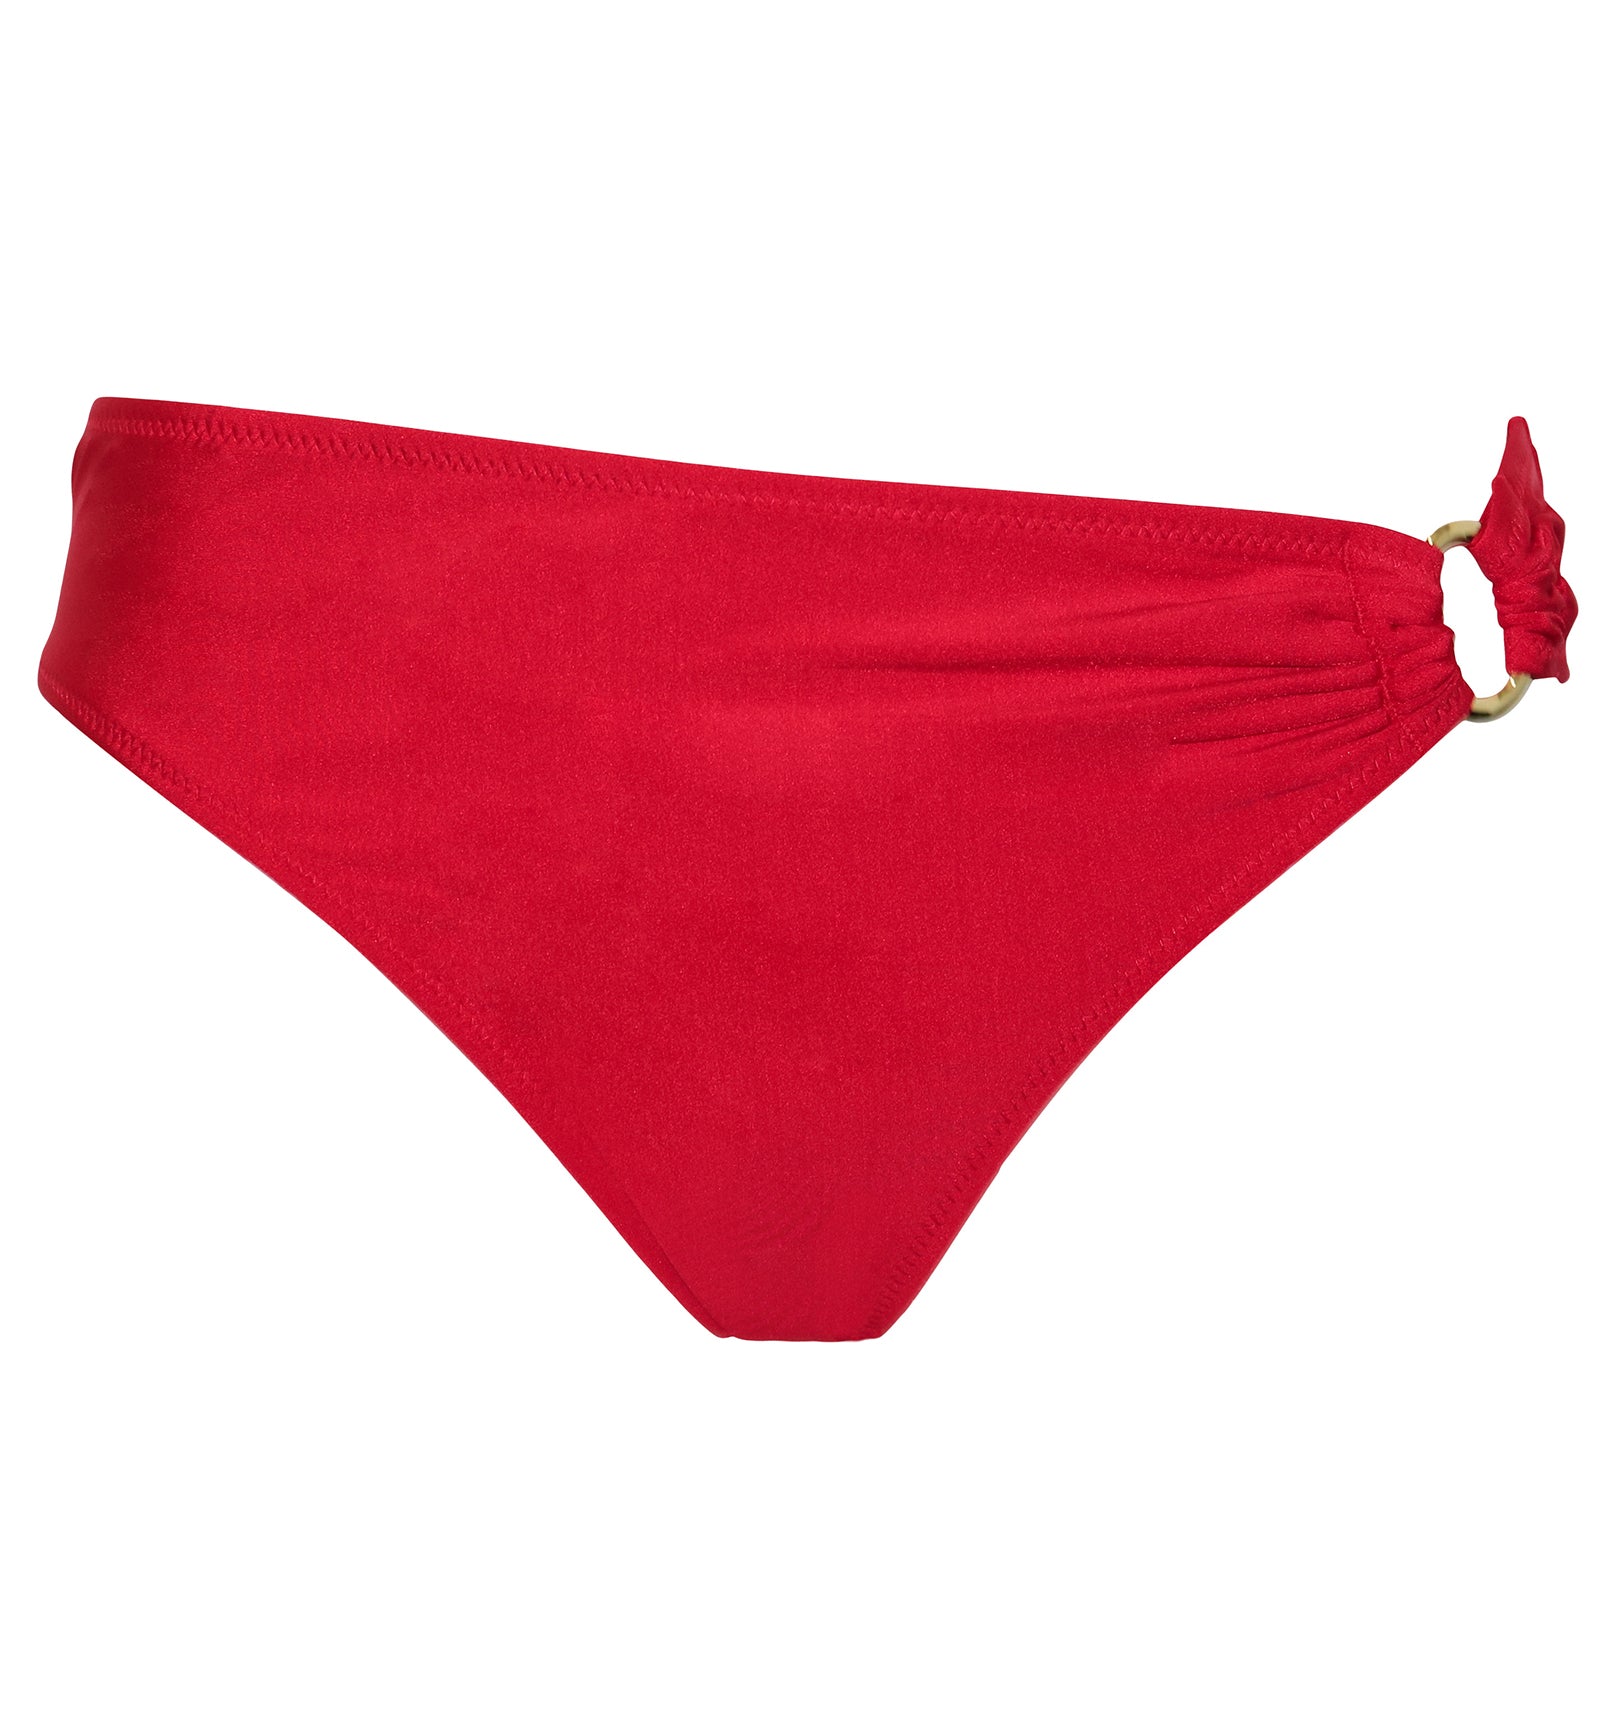 Pour Moi Samoa Ring Detail Swim Brief (20913),XS,Red - Red,XS